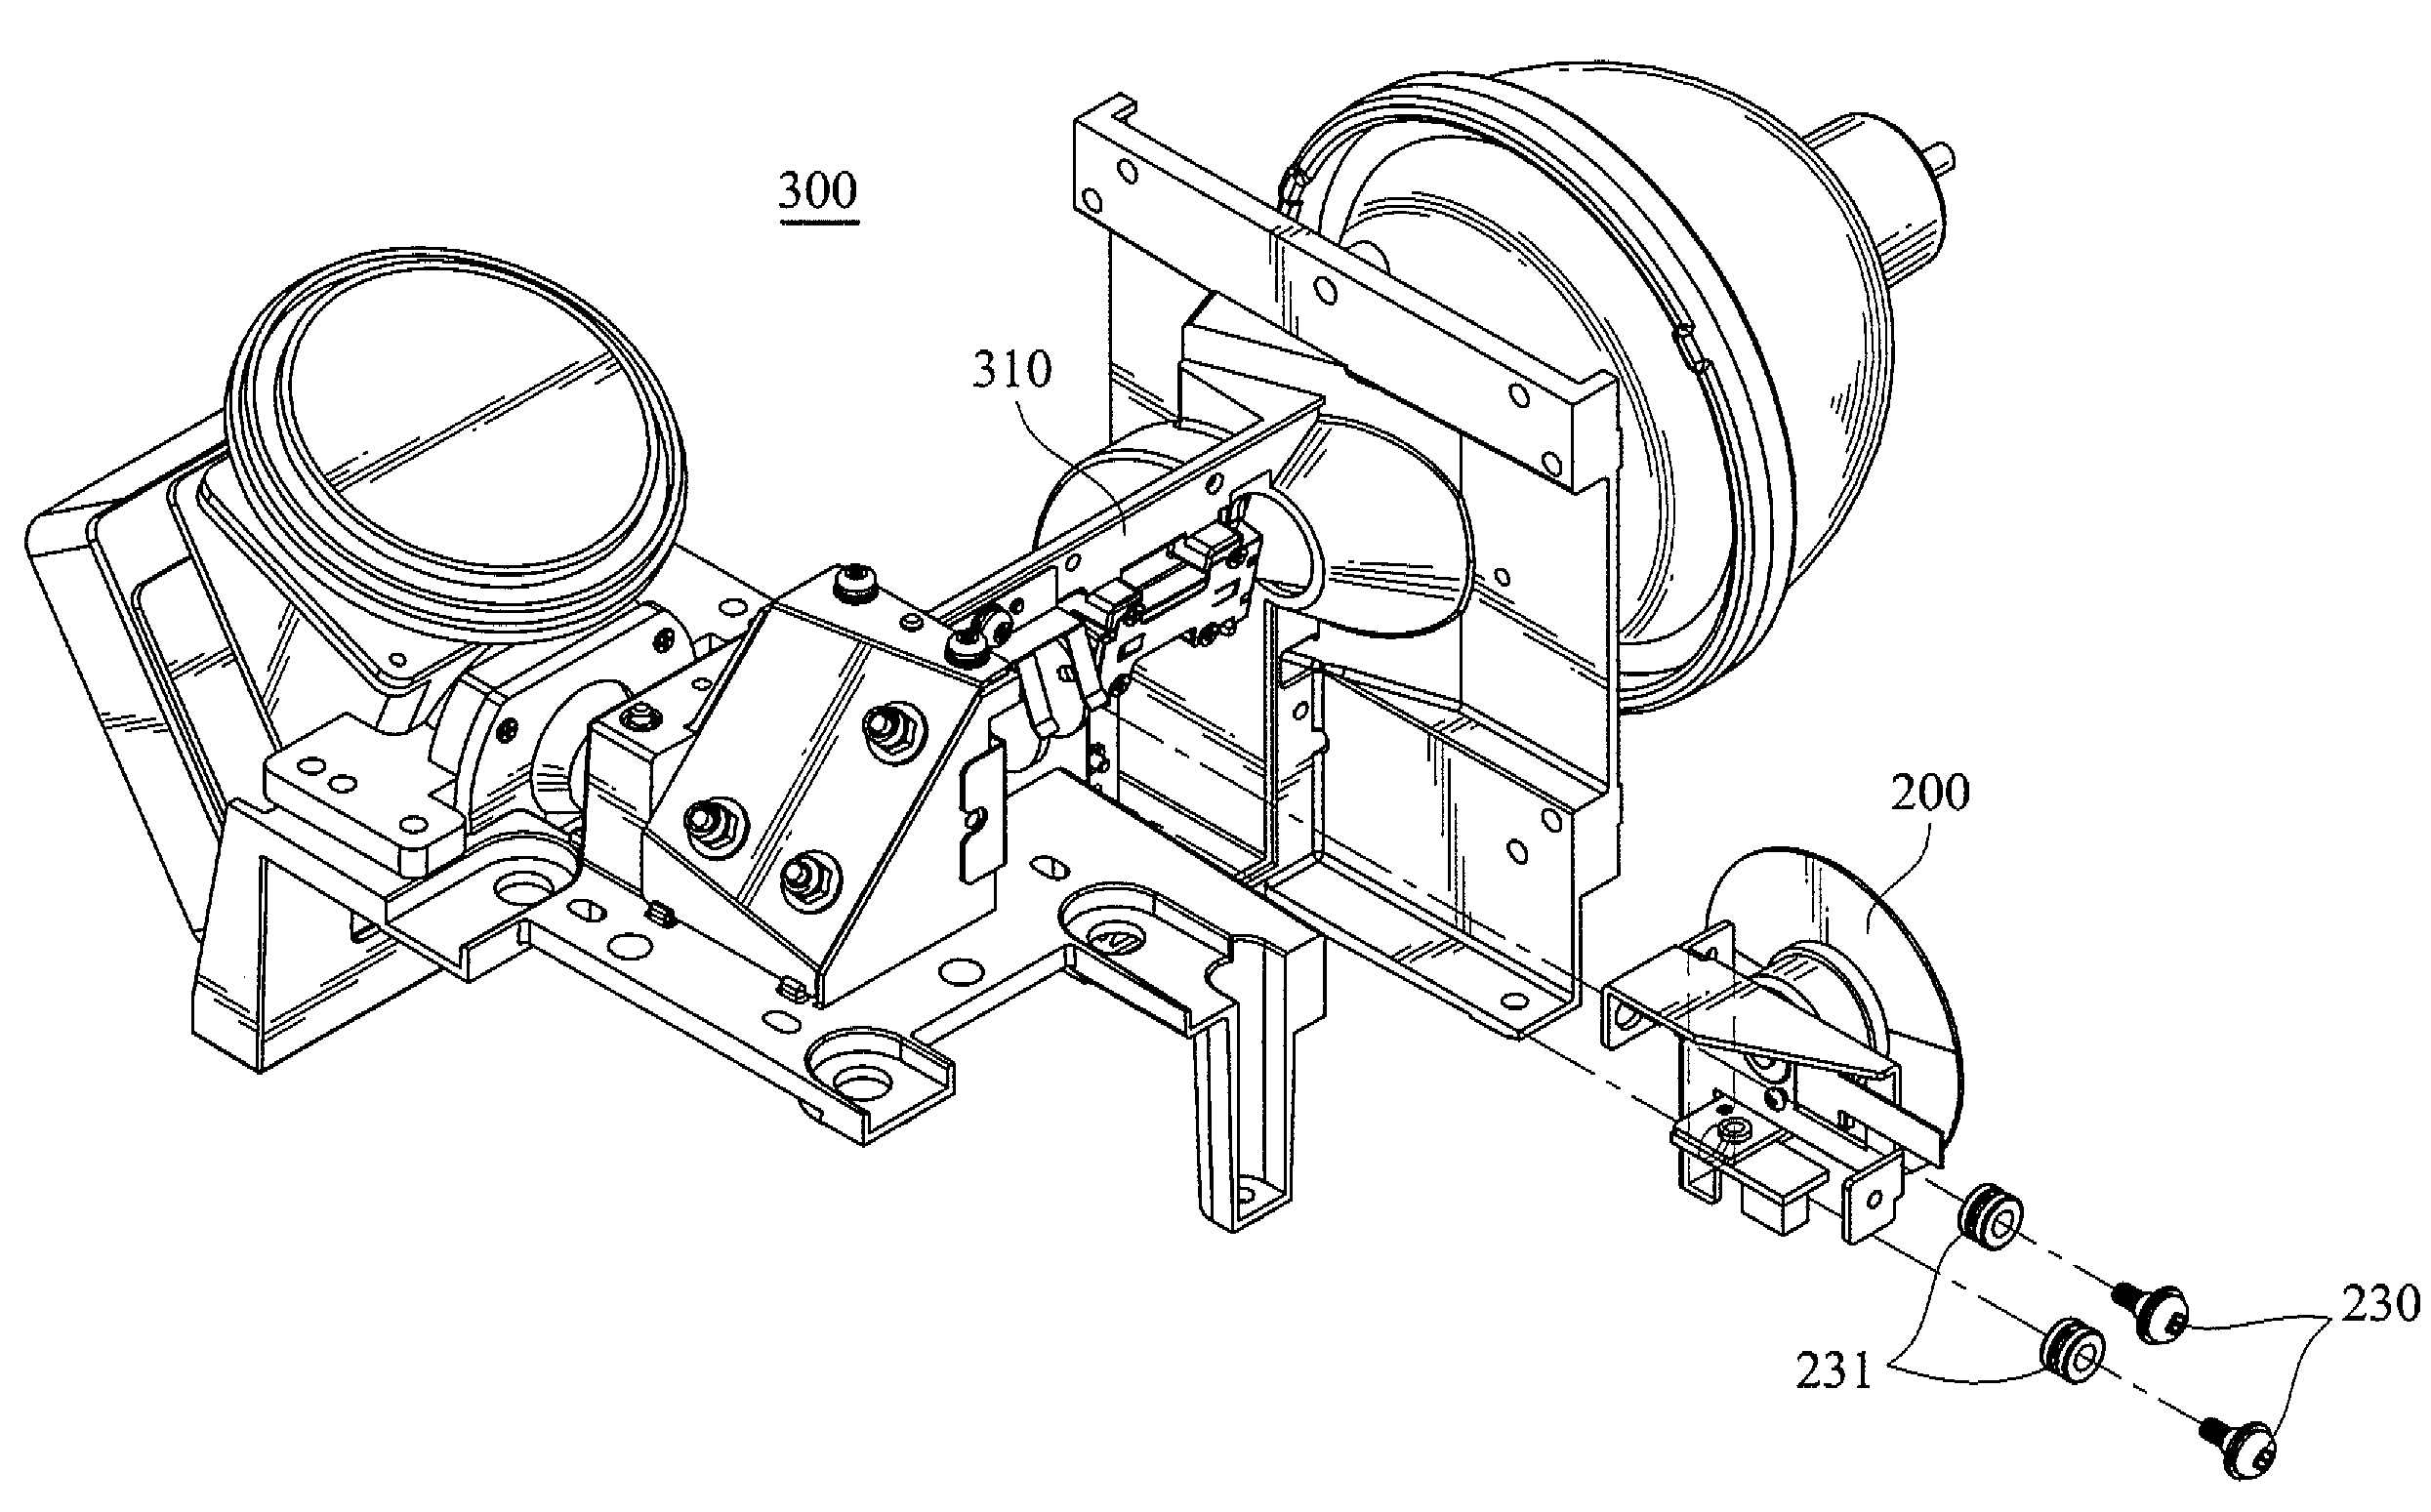 Color wheel module for use in an optical engine and said optical engine